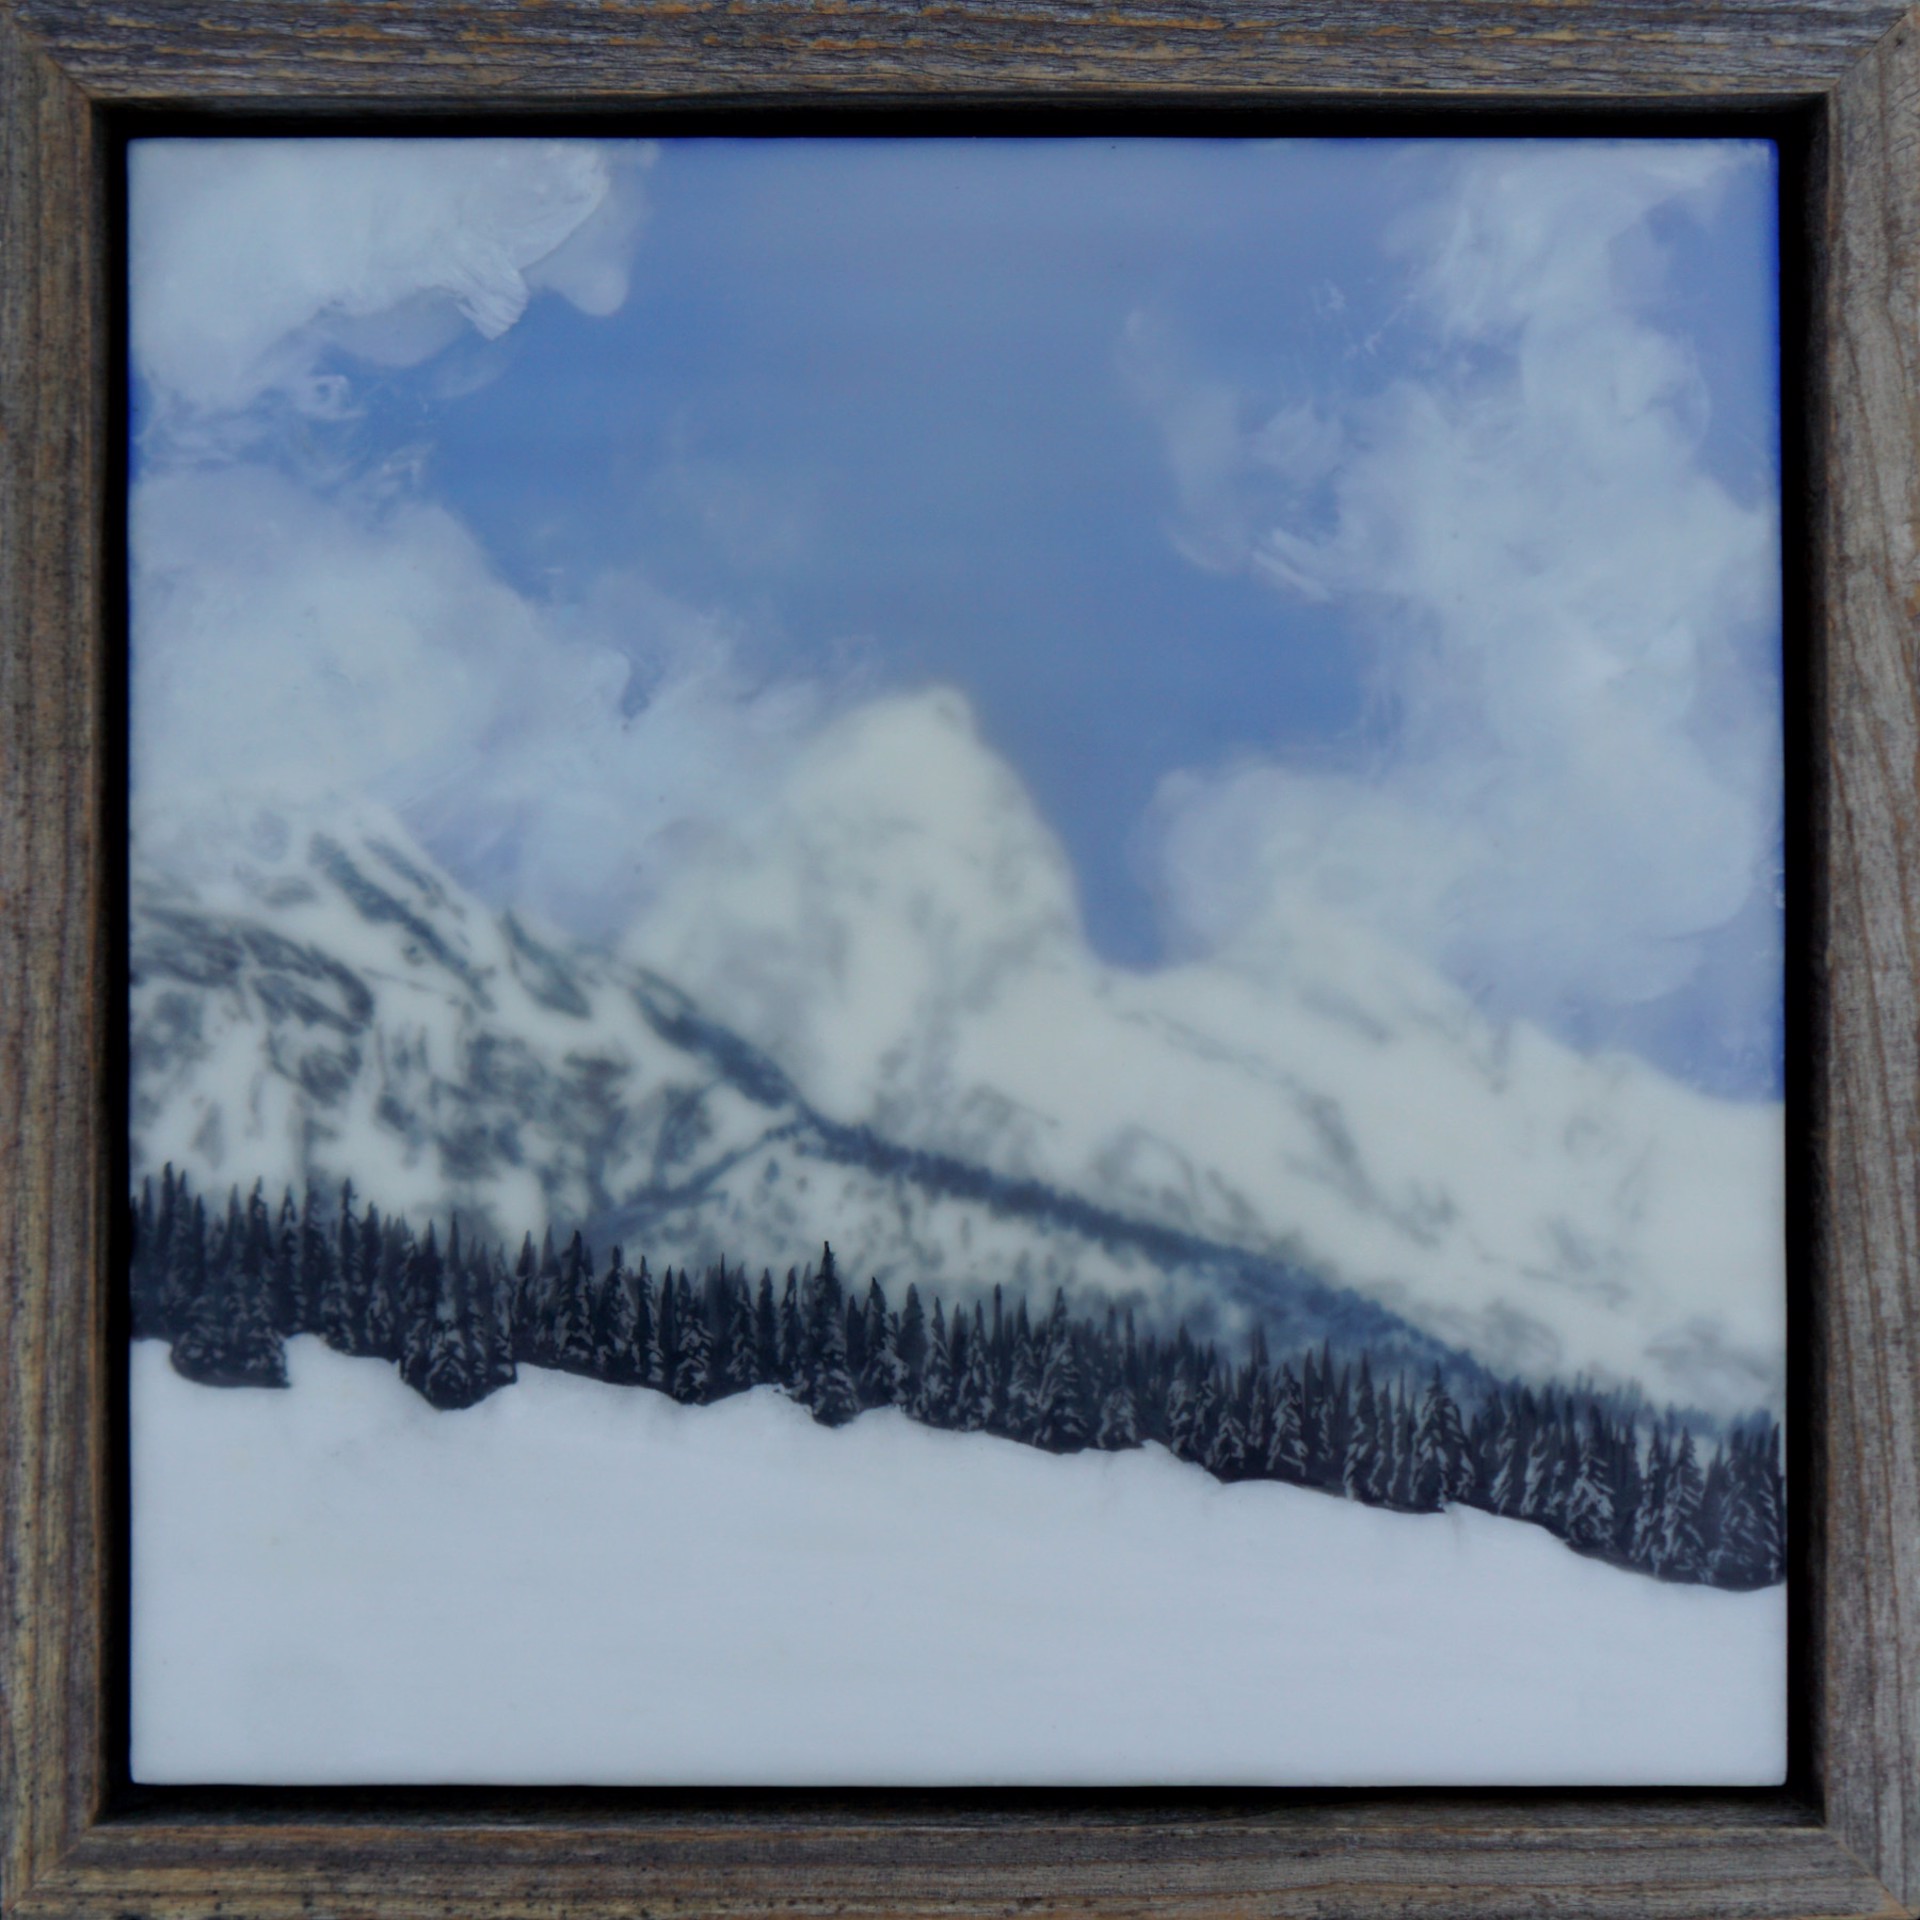 An Original Encaustic And Milk Paint Painting Of The Grand Teton And Surrounding Mountains On A Misty Snowy Morning With Blue Sky, By Bridgette Meinhold